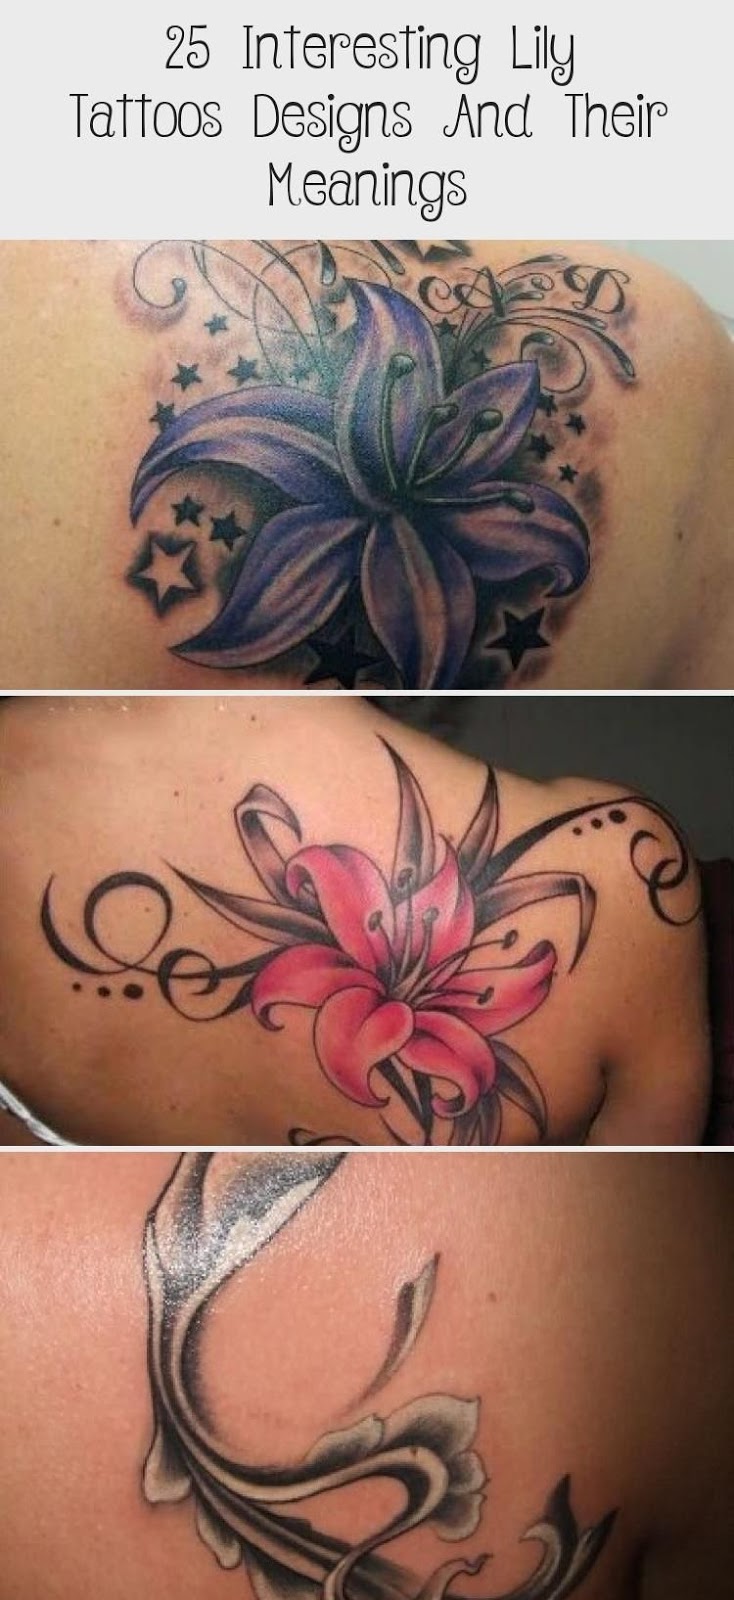 Lily Shoulder Tattoos Meaning Ideas Designs (244)